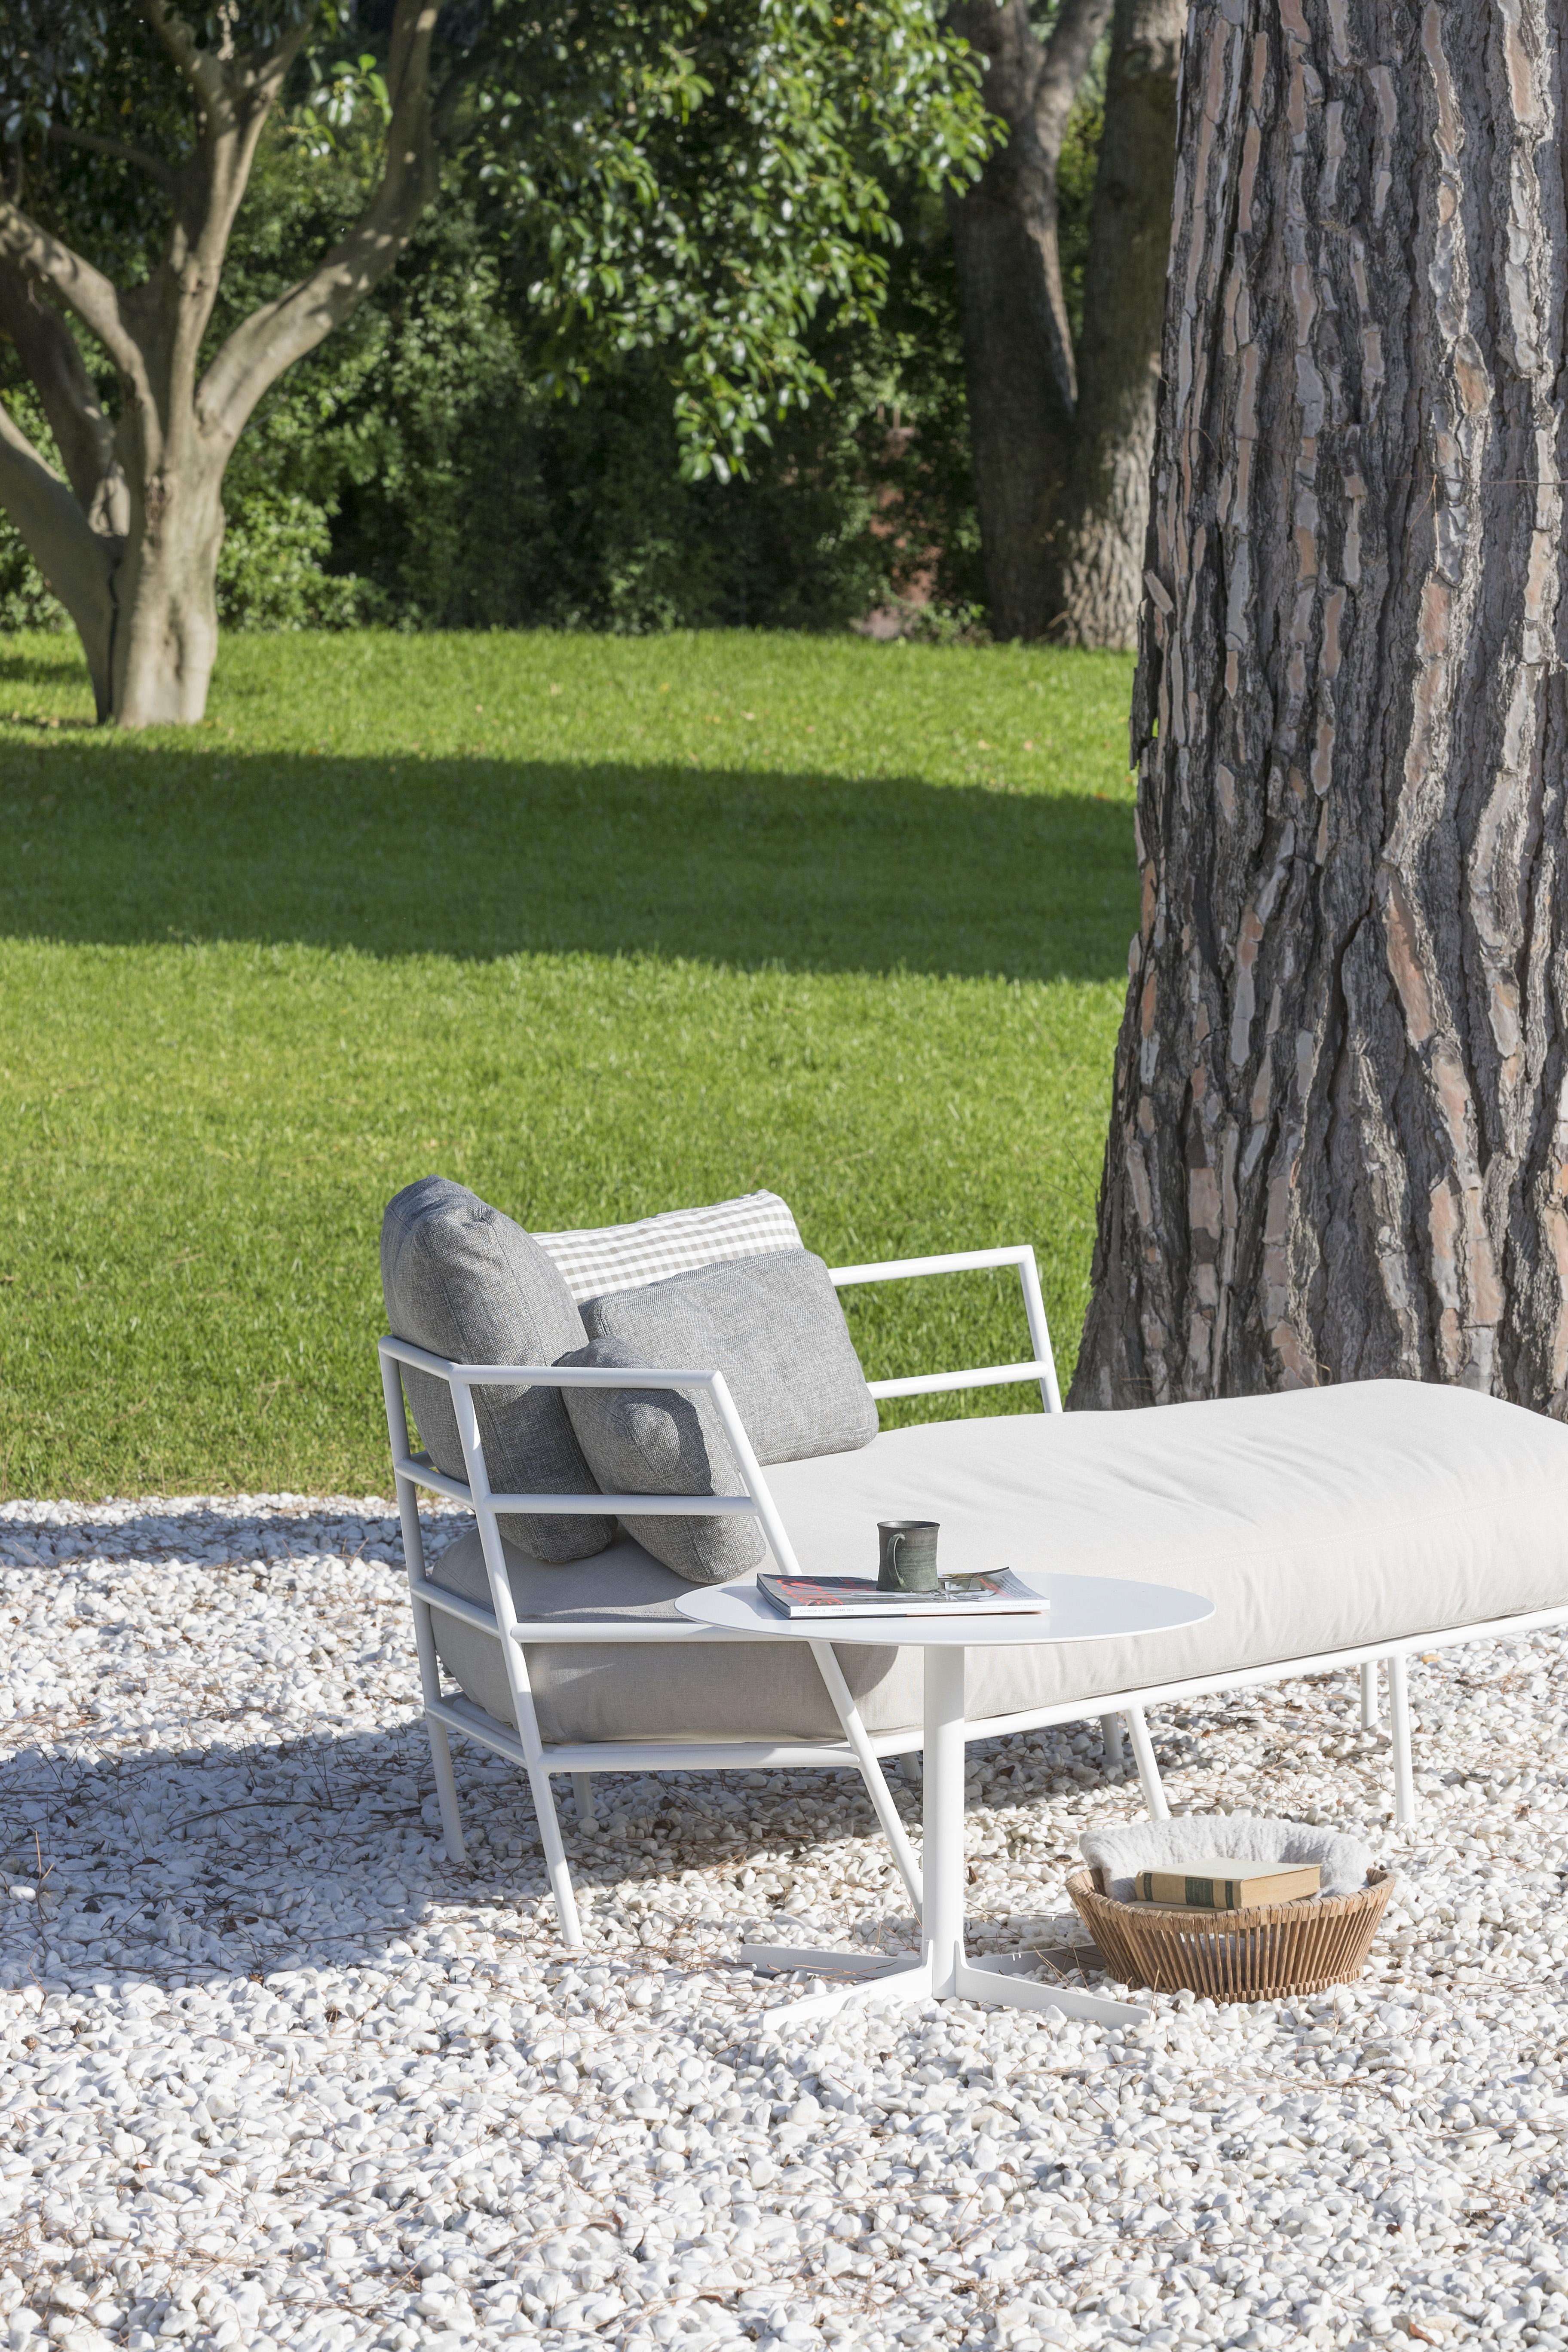 Alias 373_O Dehors Dormeuse Chair with Upholstery and White Lacquered Frame by Michele De Lucch

Three-seater sofa for outdoor use with structure in lacquered steel. Removable cover in Tempotest® or Alias® fabric. Cushions included in the prices: